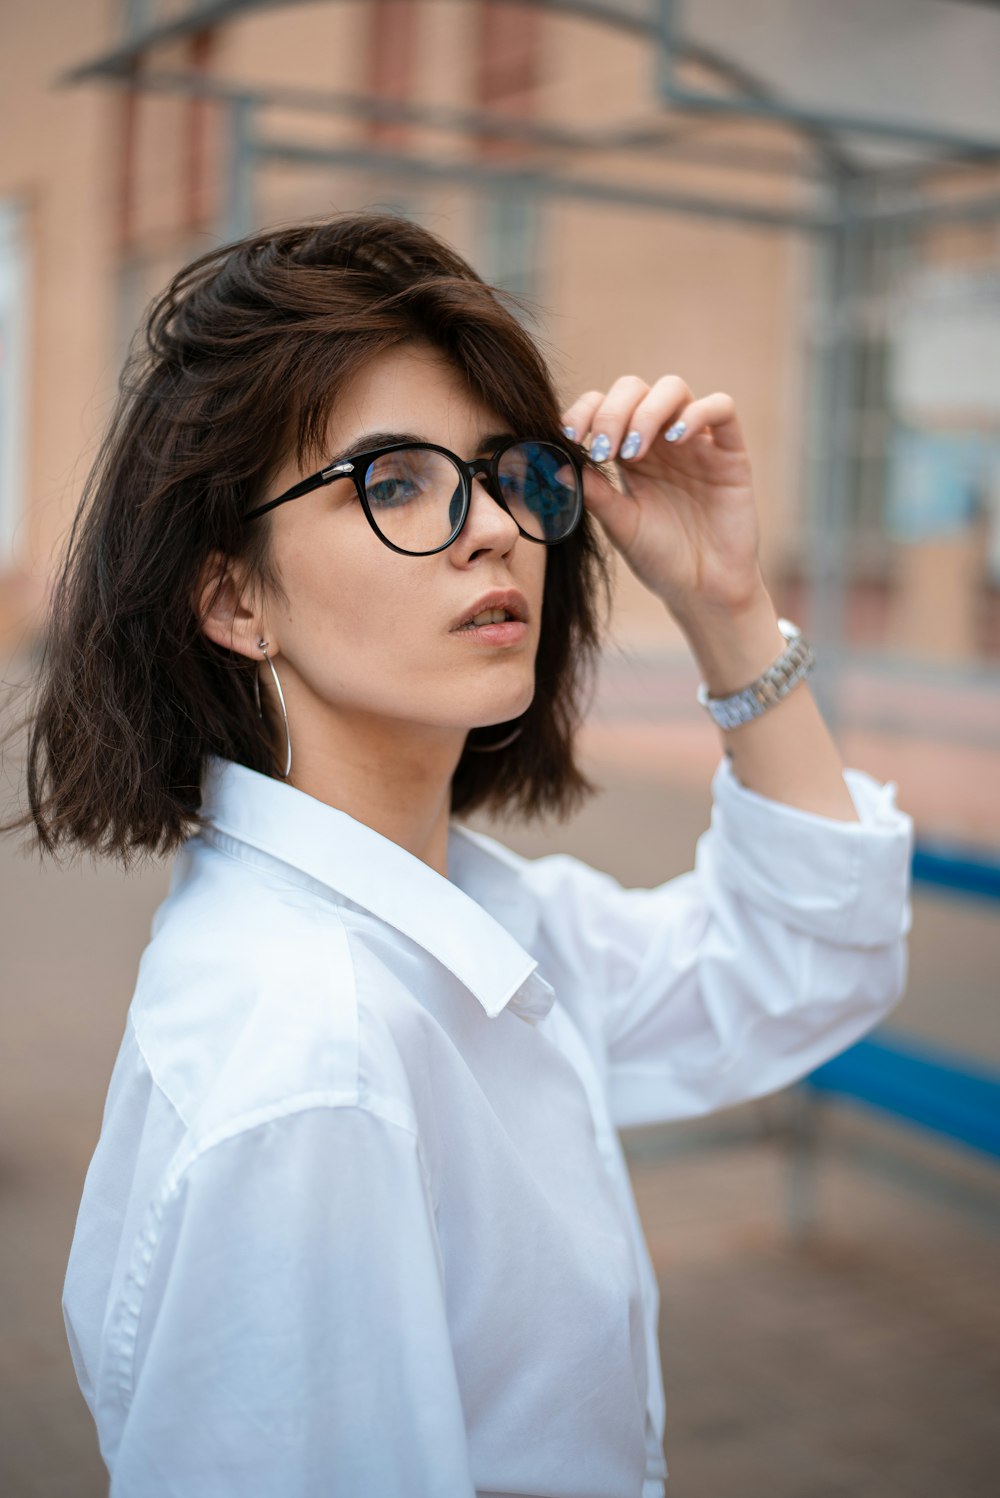 a woman wearing glasses and a white shirt